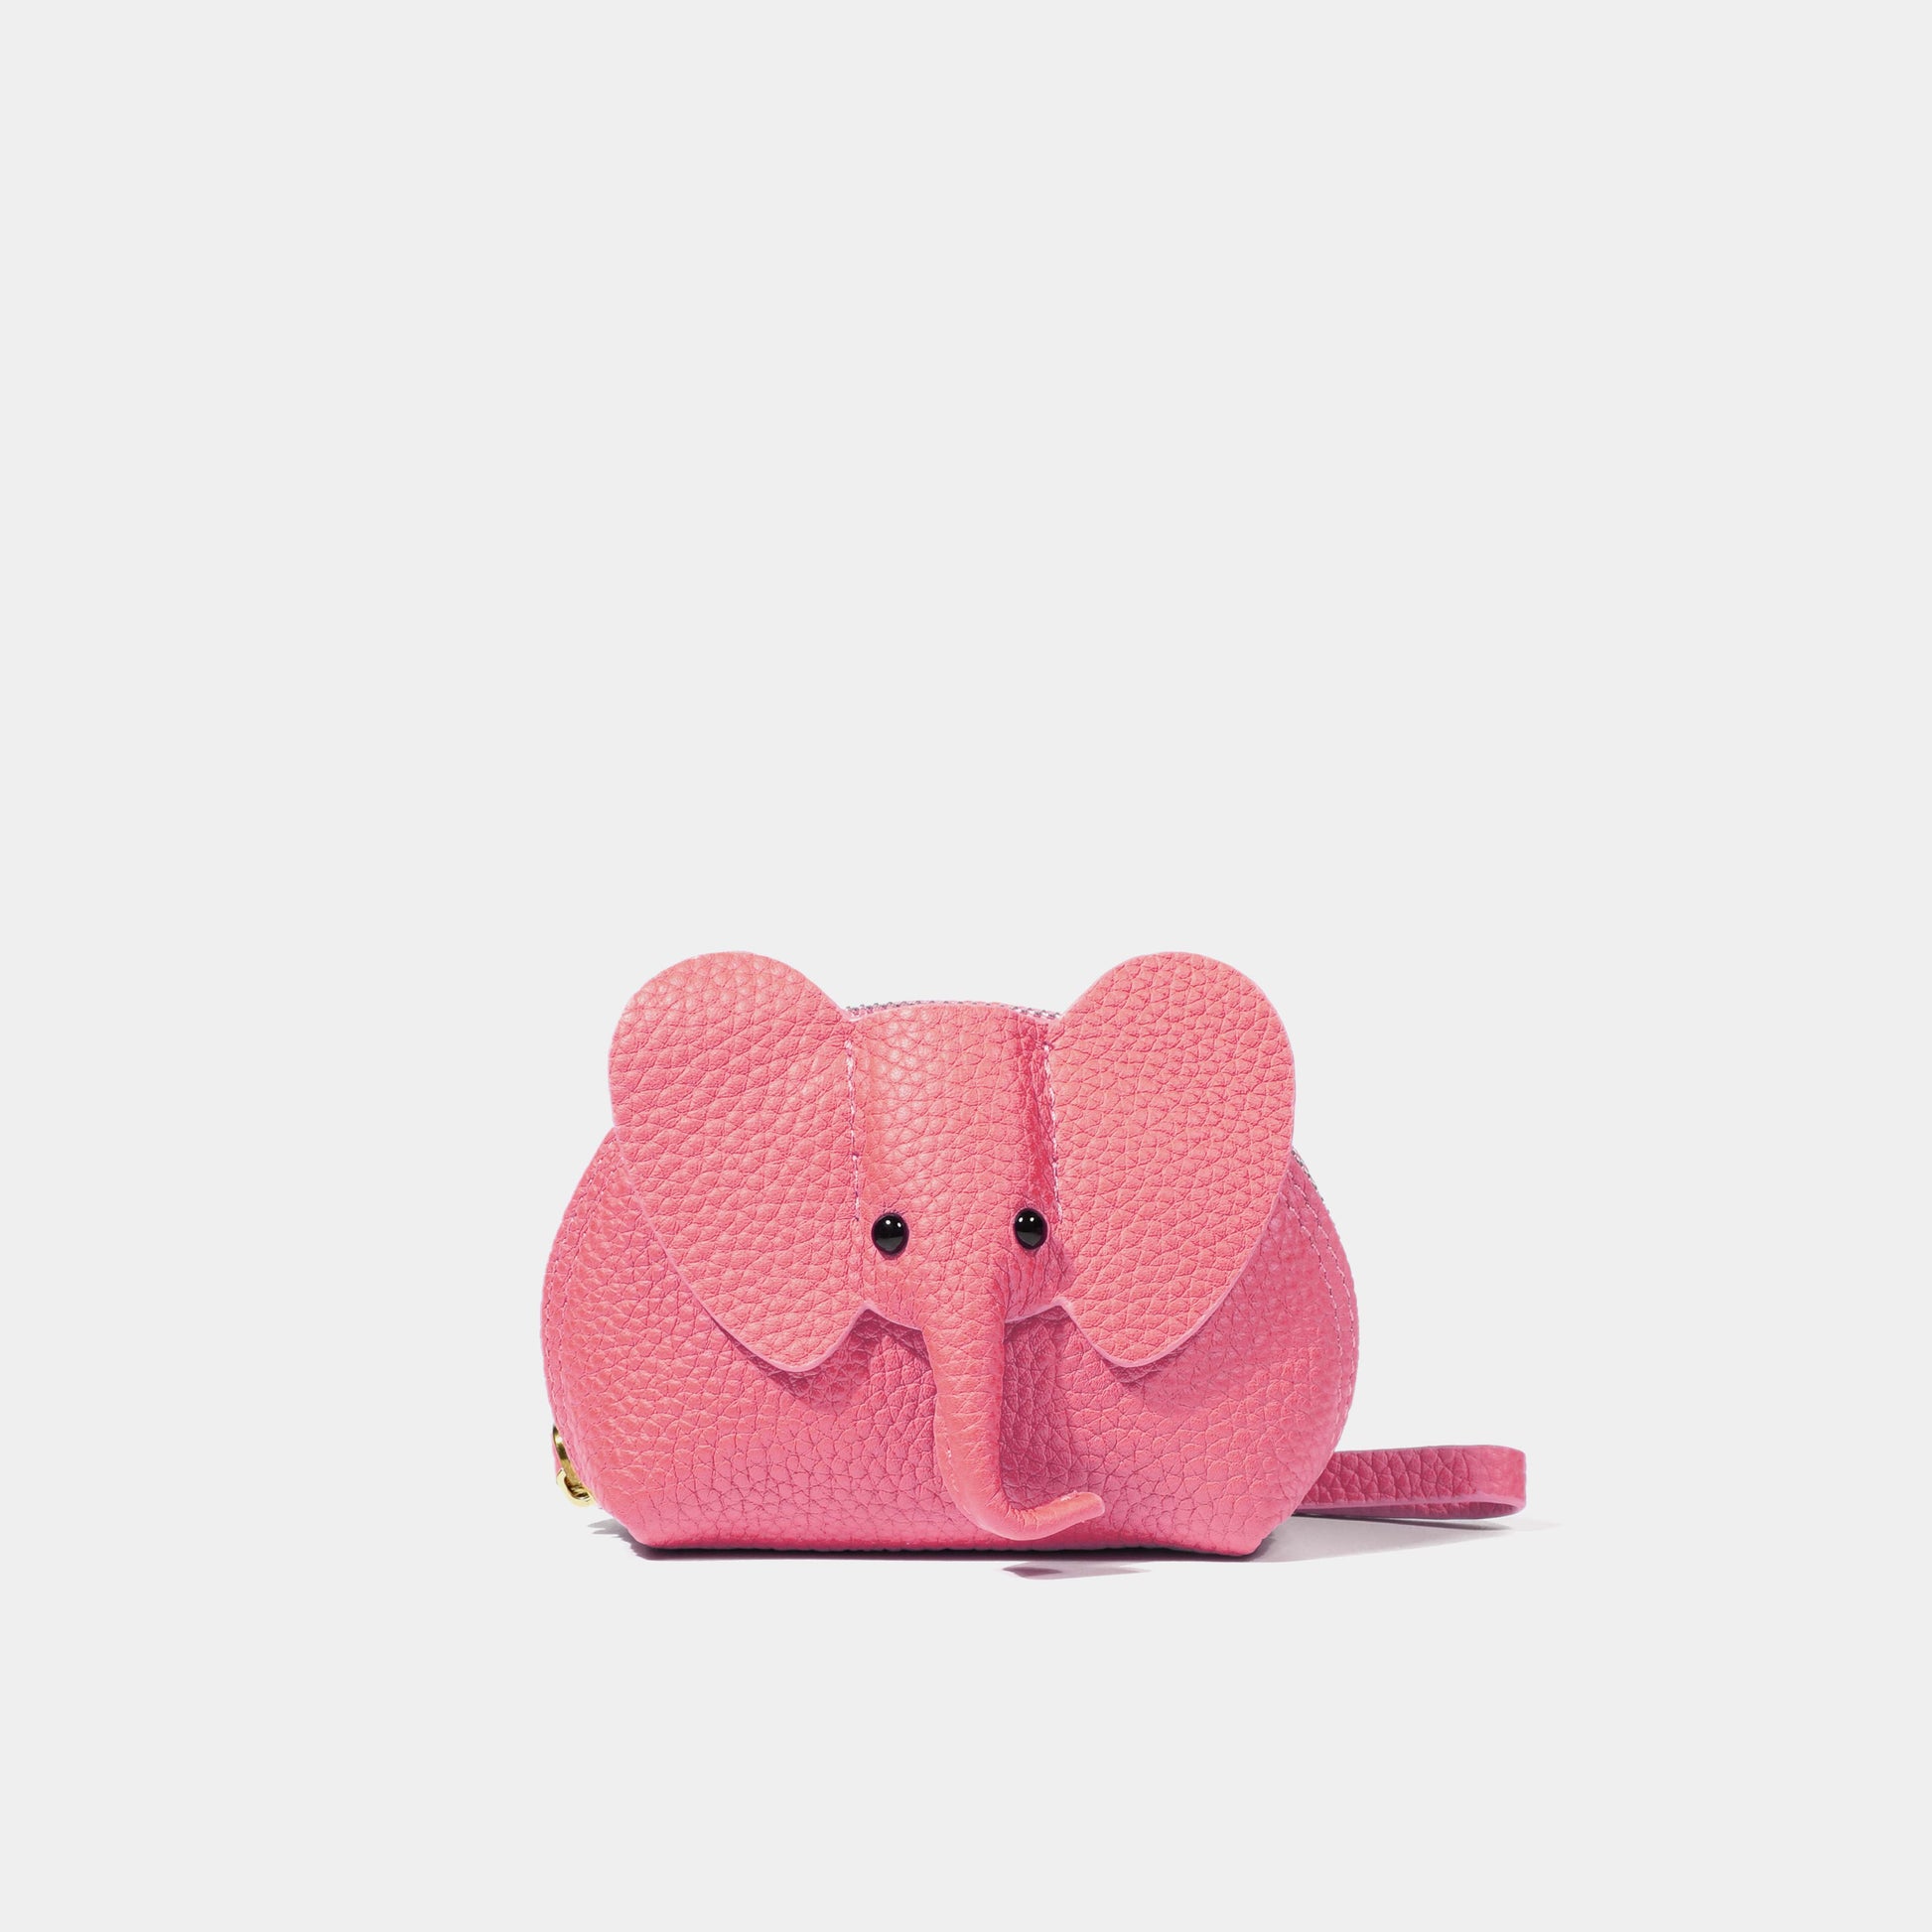 Elephant Leather Coins Purse-Calf Leather Coins Purse-Pink